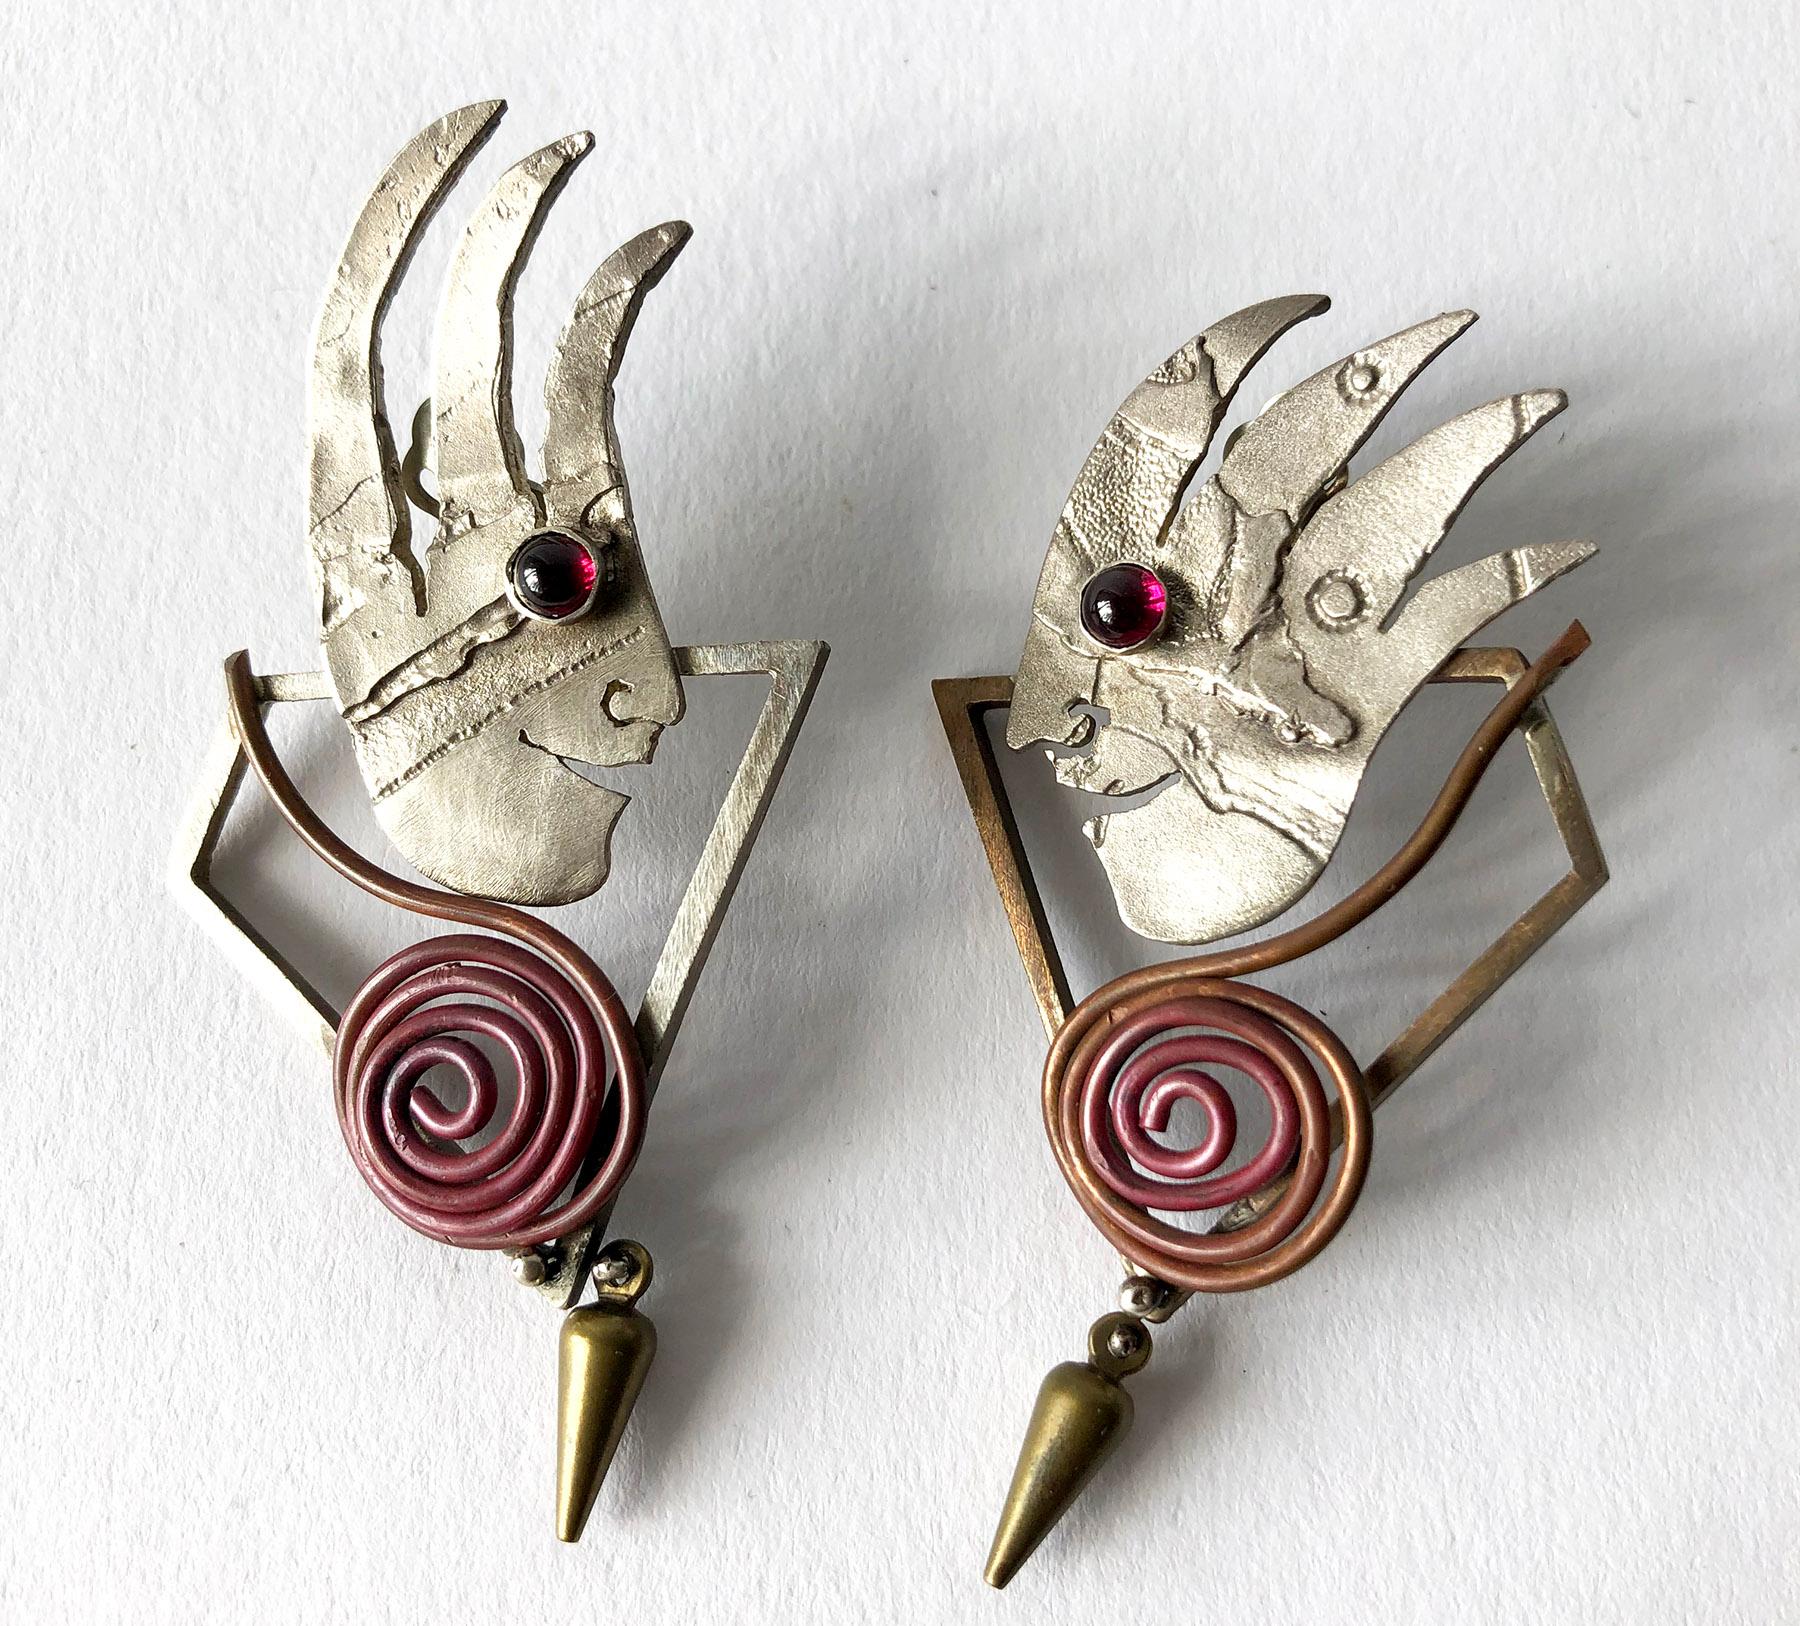 Pair of hand made sterling silver, 14k gold, brass, carnelian and onyx earrings created by New York jeweler and artist, Enid Kaplan.  Earrings are of the clip back variety and are signed Enid Kaplan, 1997.  In very good, unworn vintage condition. 